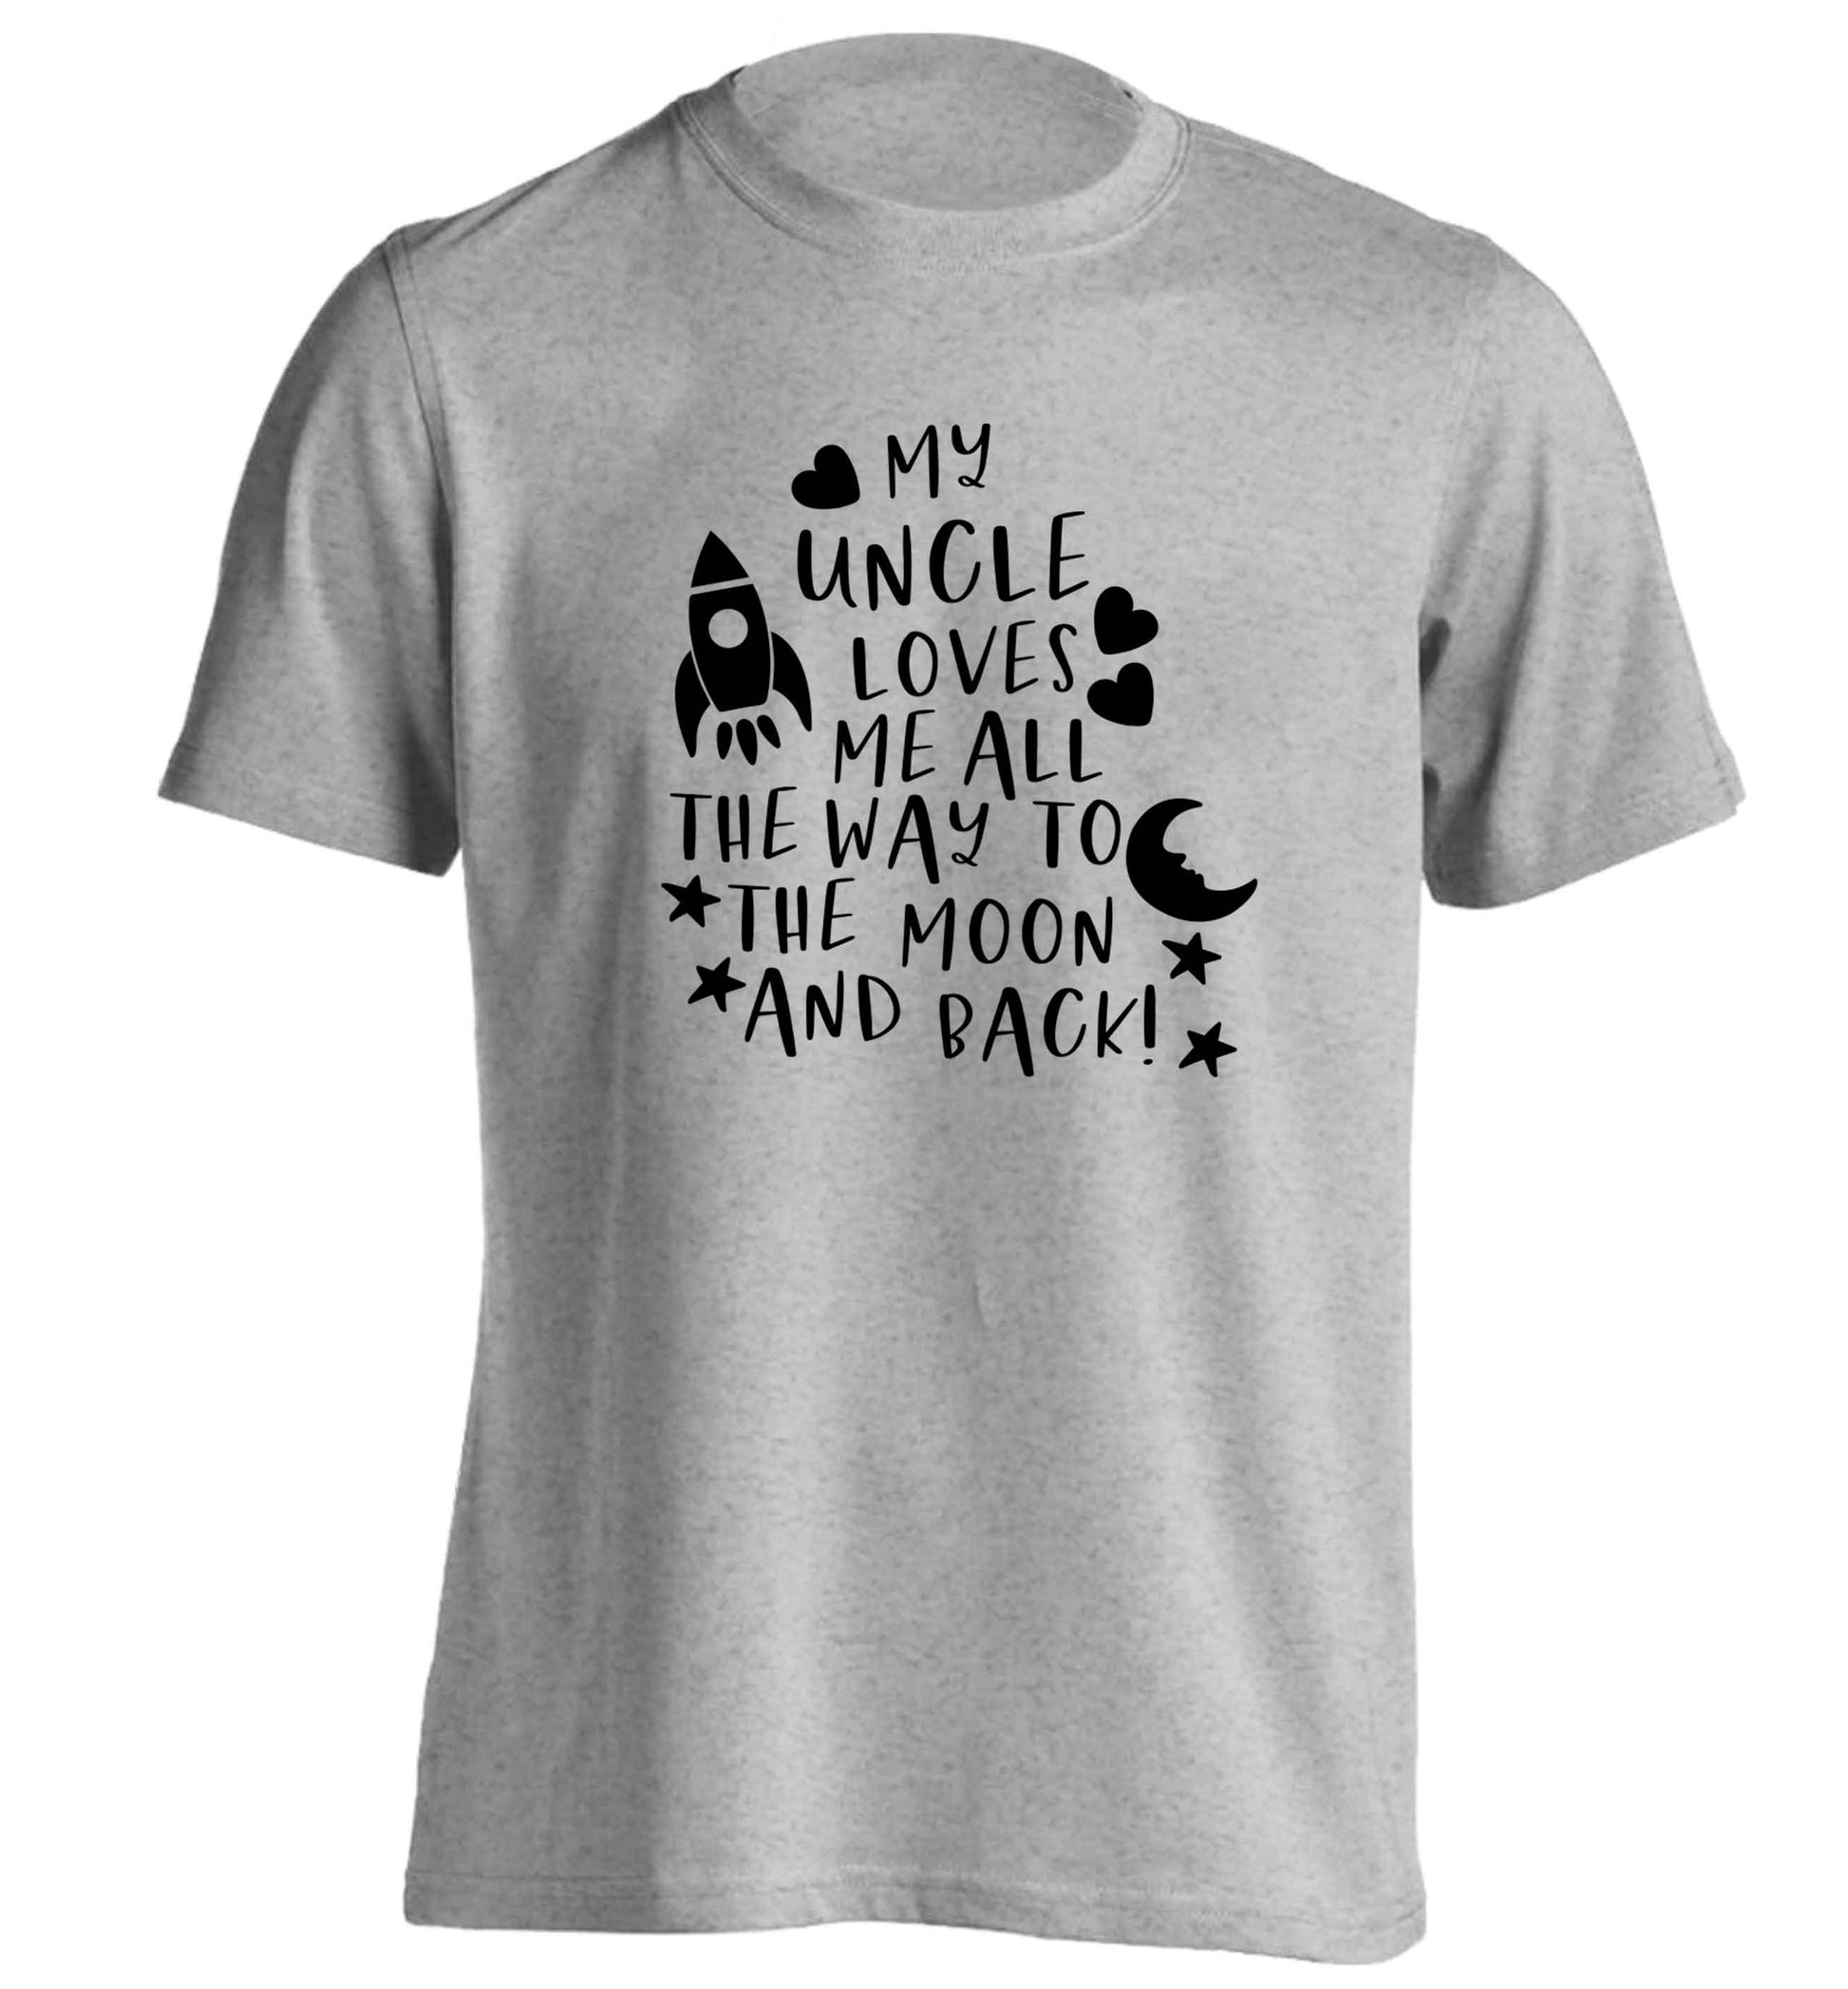 My uncle loves me all the way to the moon and back adults unisex grey Tshirt 2XL